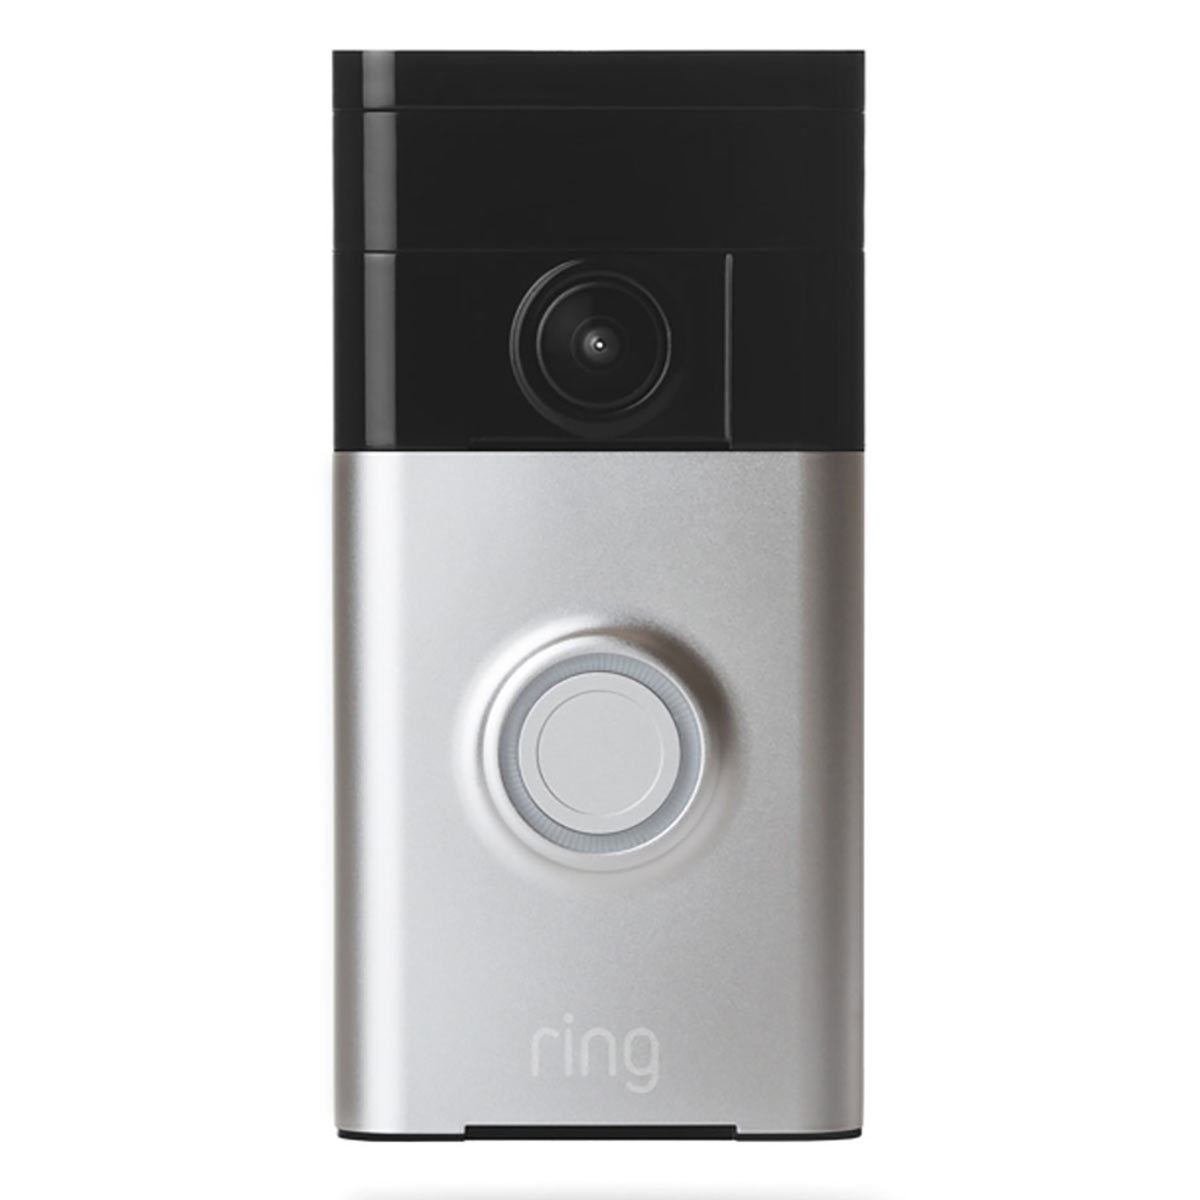 Ring Full HD 1080p Video Doorbell 2 with Chime Pro Costco UK